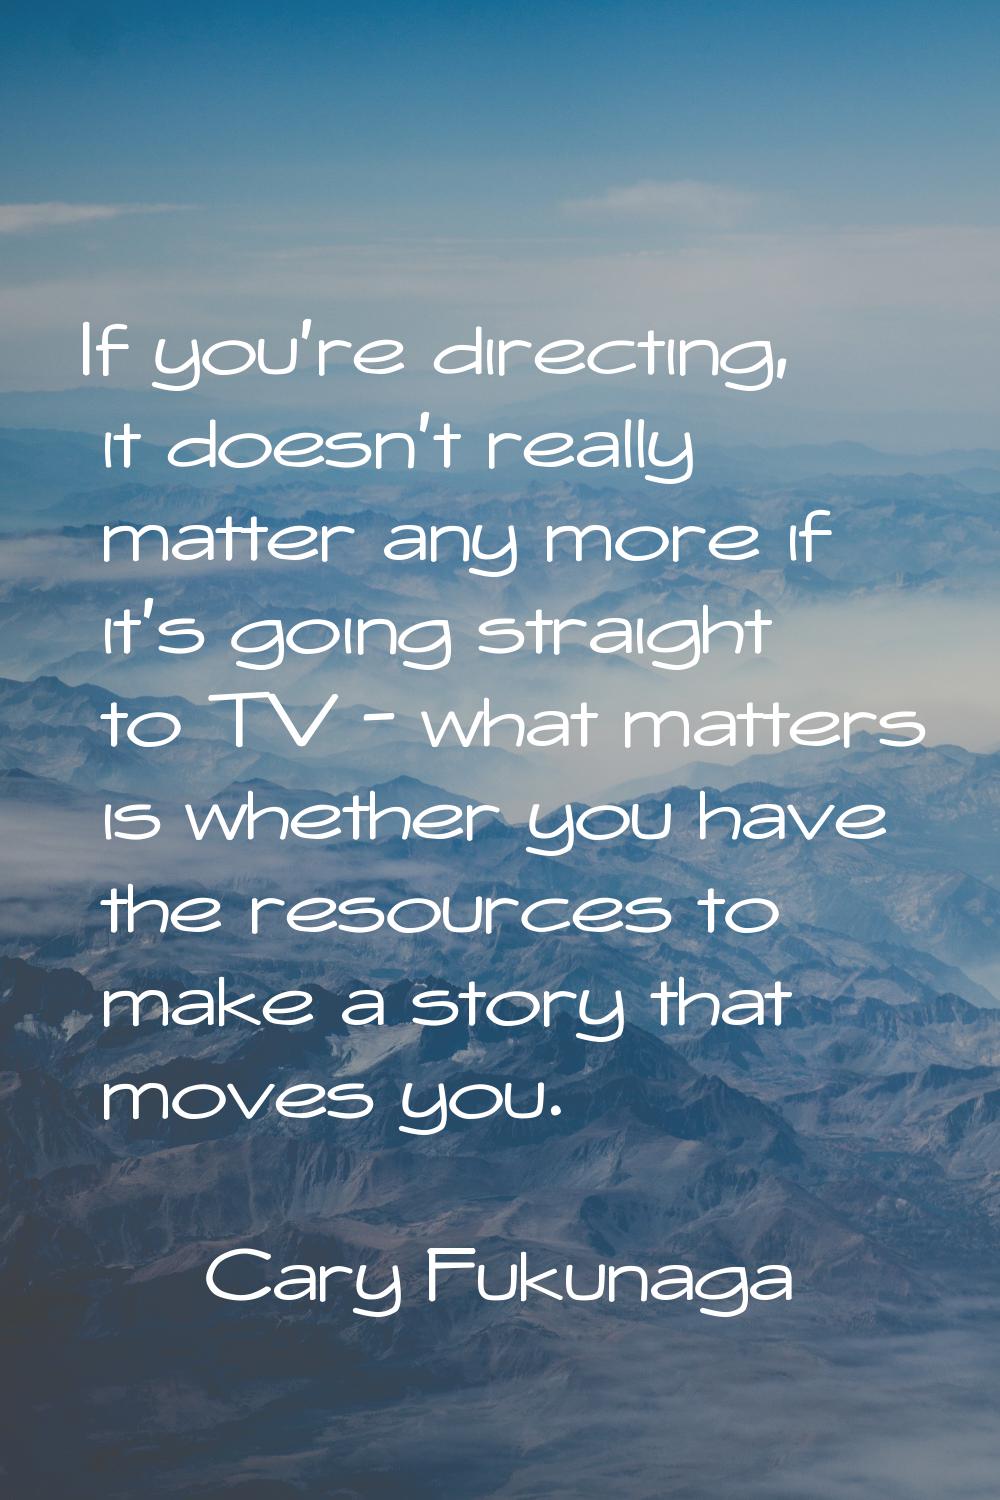 If you're directing, it doesn't really matter any more if it's going straight to TV - what matters 